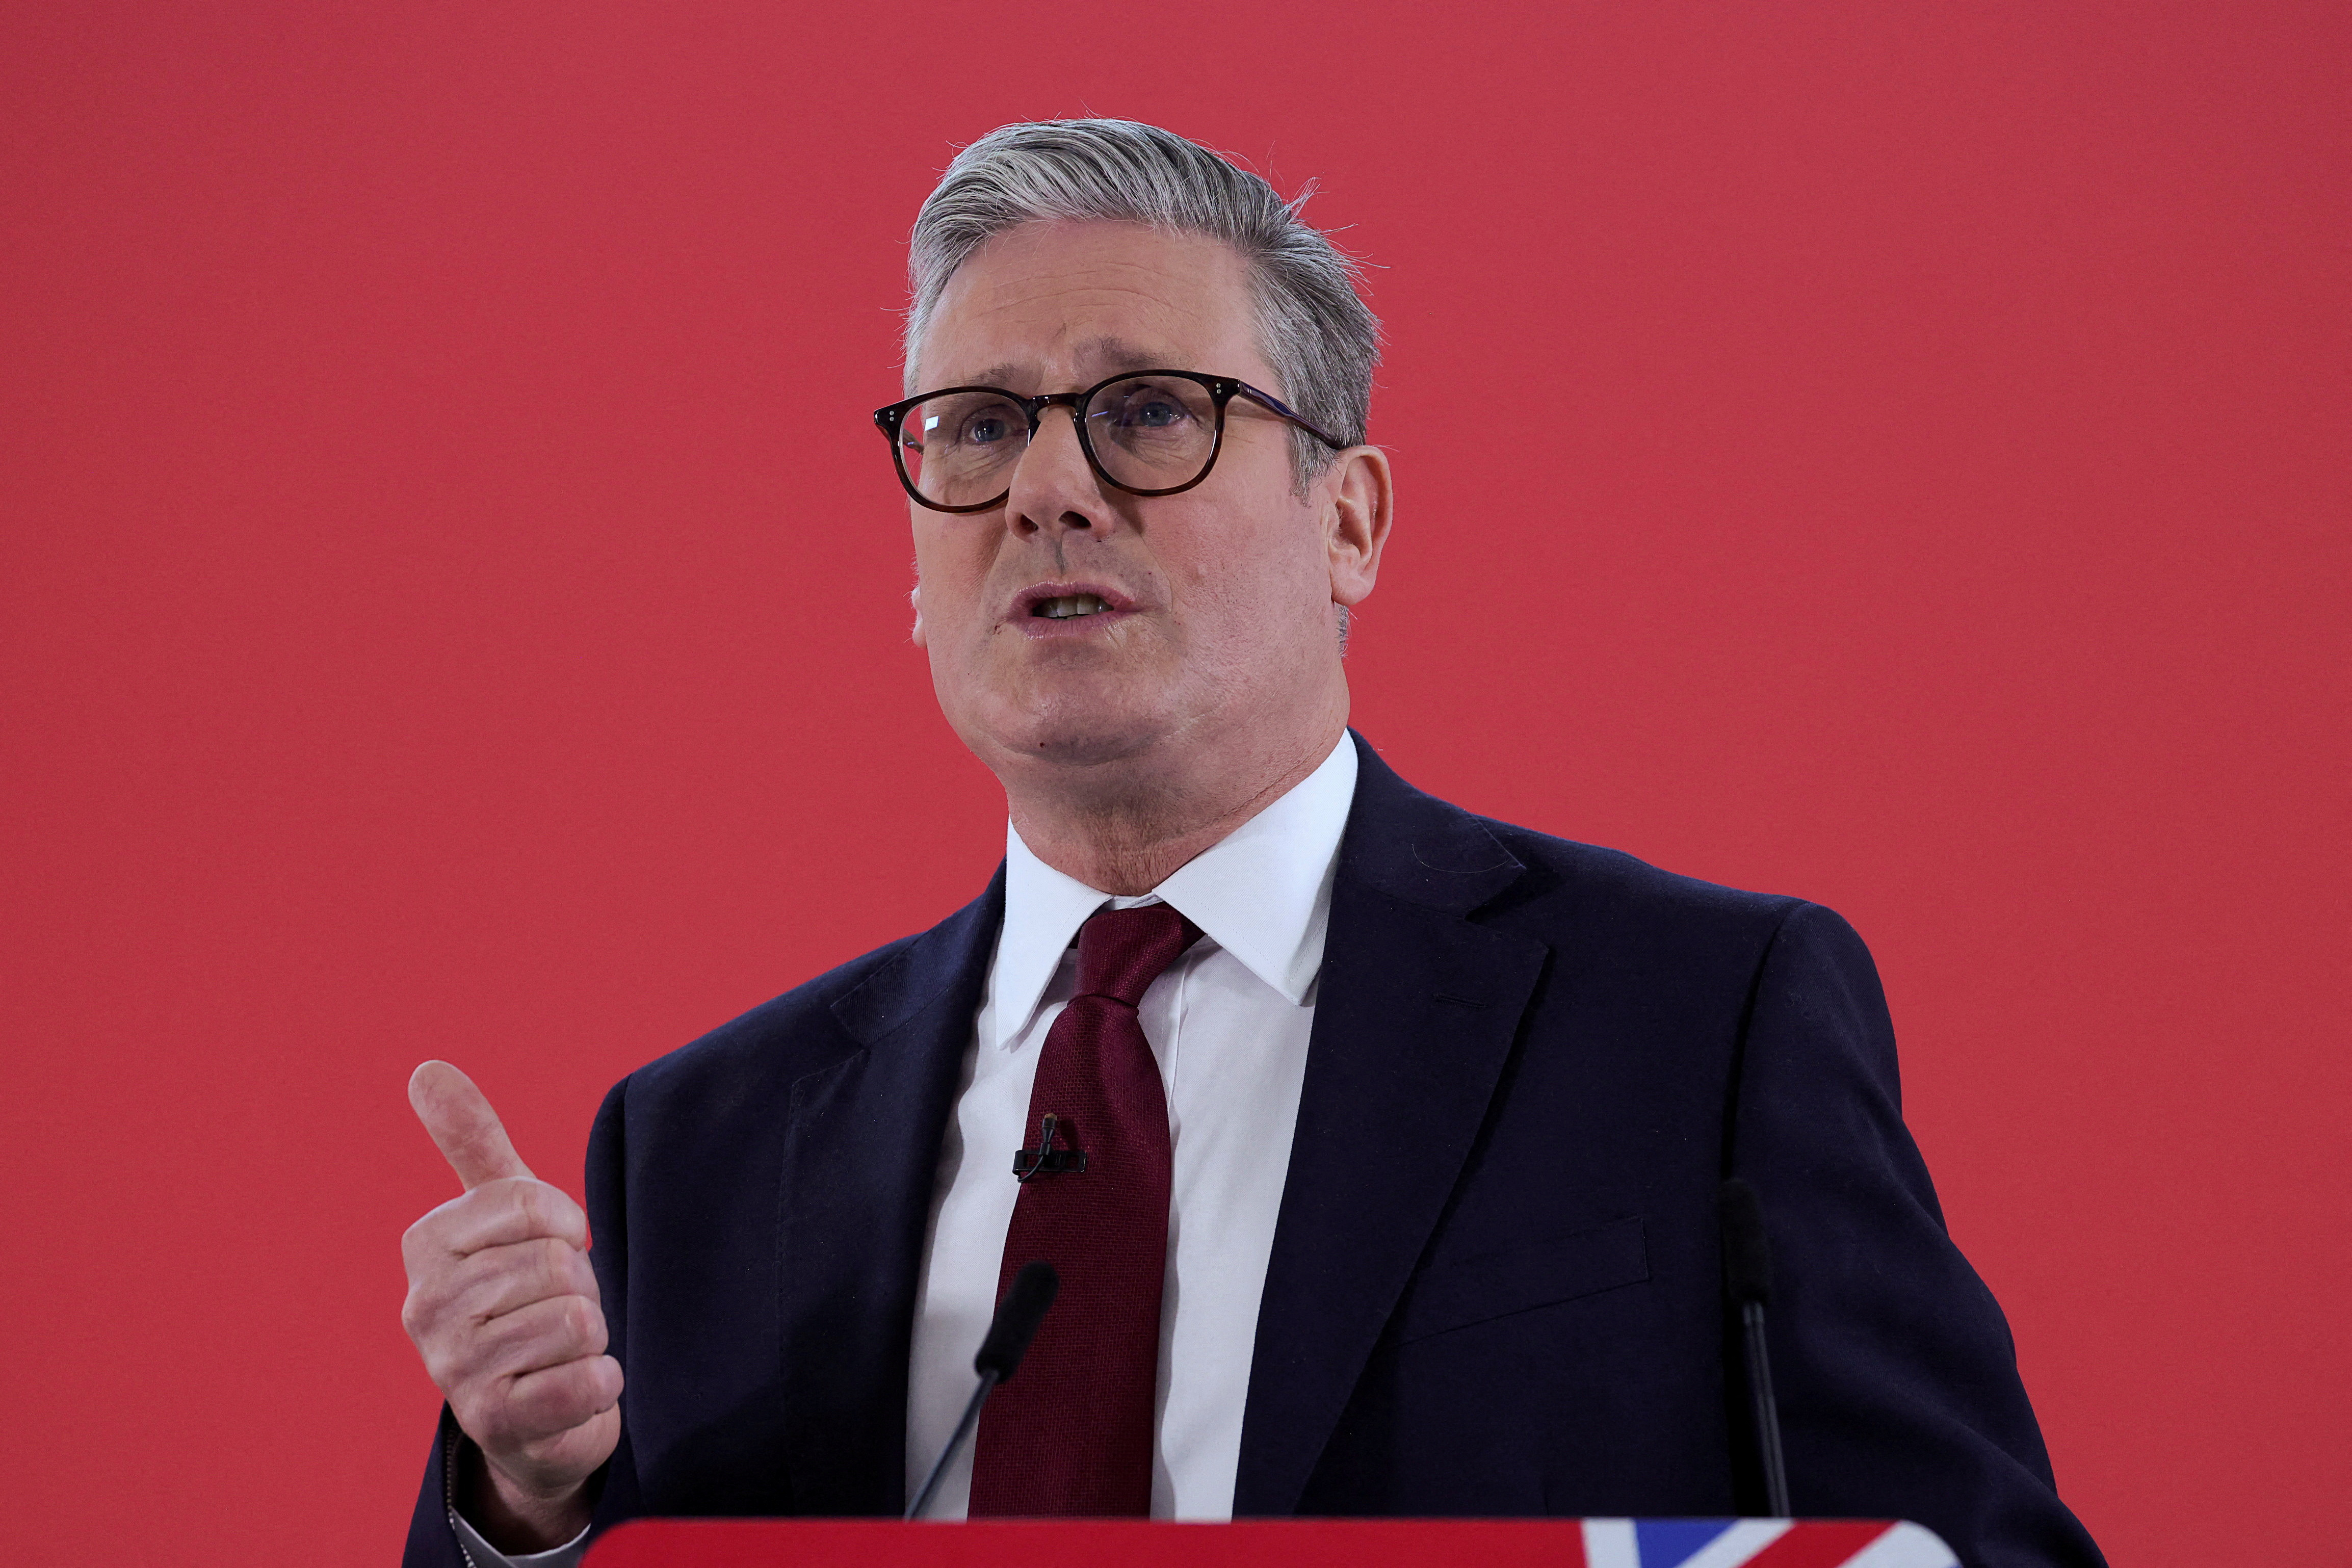 Britain's opposition Labour Party leader Keir Starmer sets out plans to tackle small boat crossings